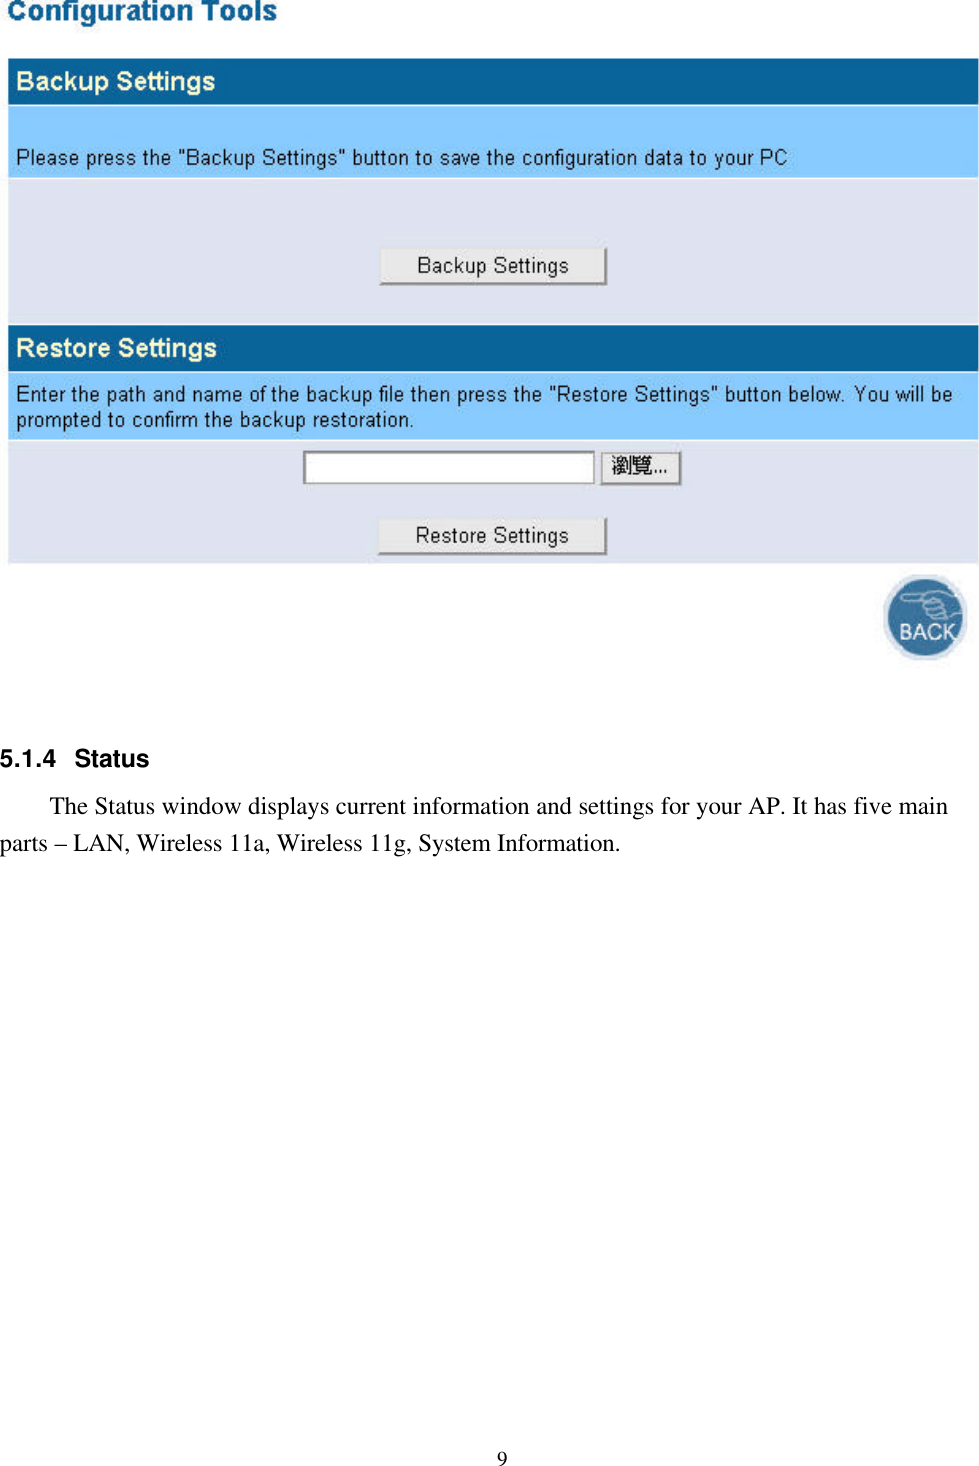 95.1.4 StatusThe Status window displays current information and settings for your AP. It has five mainparts – LAN, Wireless 11a, Wireless 11g, System Information.